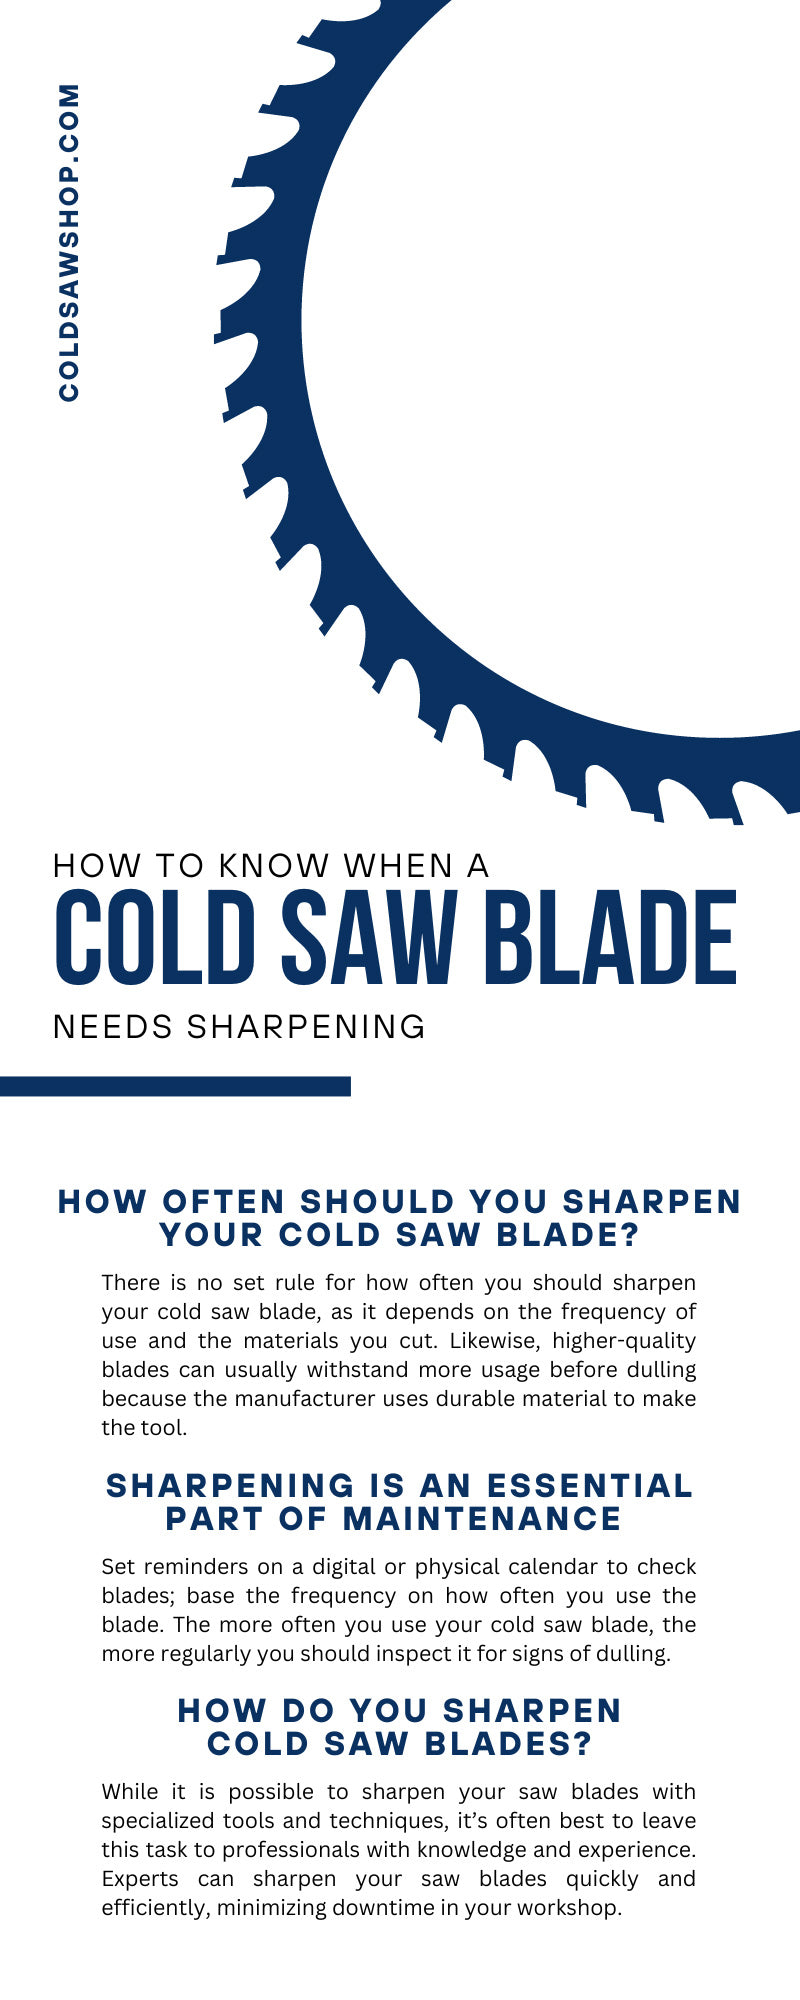 How To Know When a Cold Saw Blade Needs Sharpening